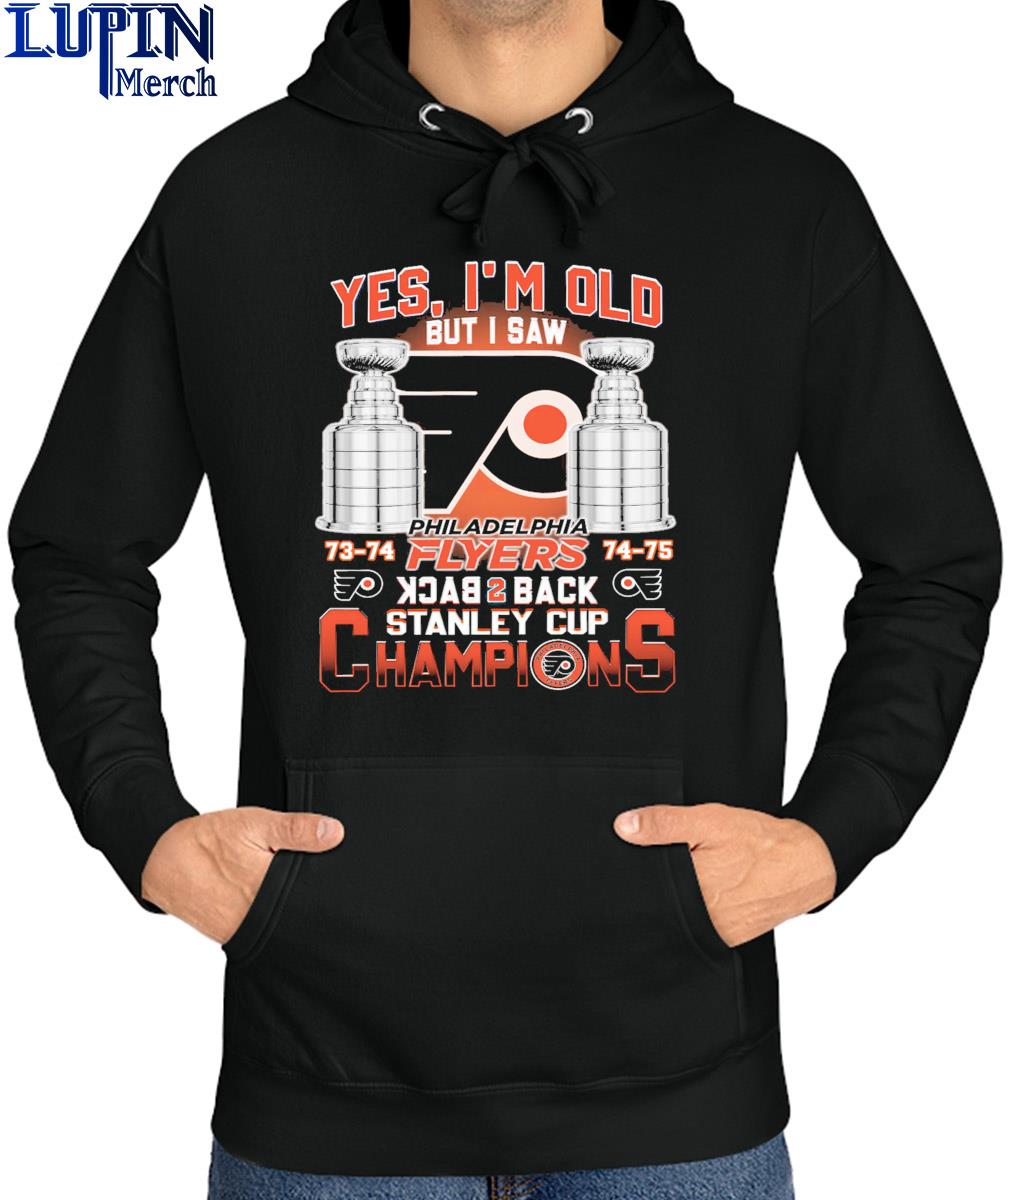 https://images.lupinmerch.com/2023/10/official-philadelphia-flyers-yes-im-old-but-i-saw-back-2-back-stanley-cup-champions-1973-1974-1975-trophy-shirt-Hoodie.jpg